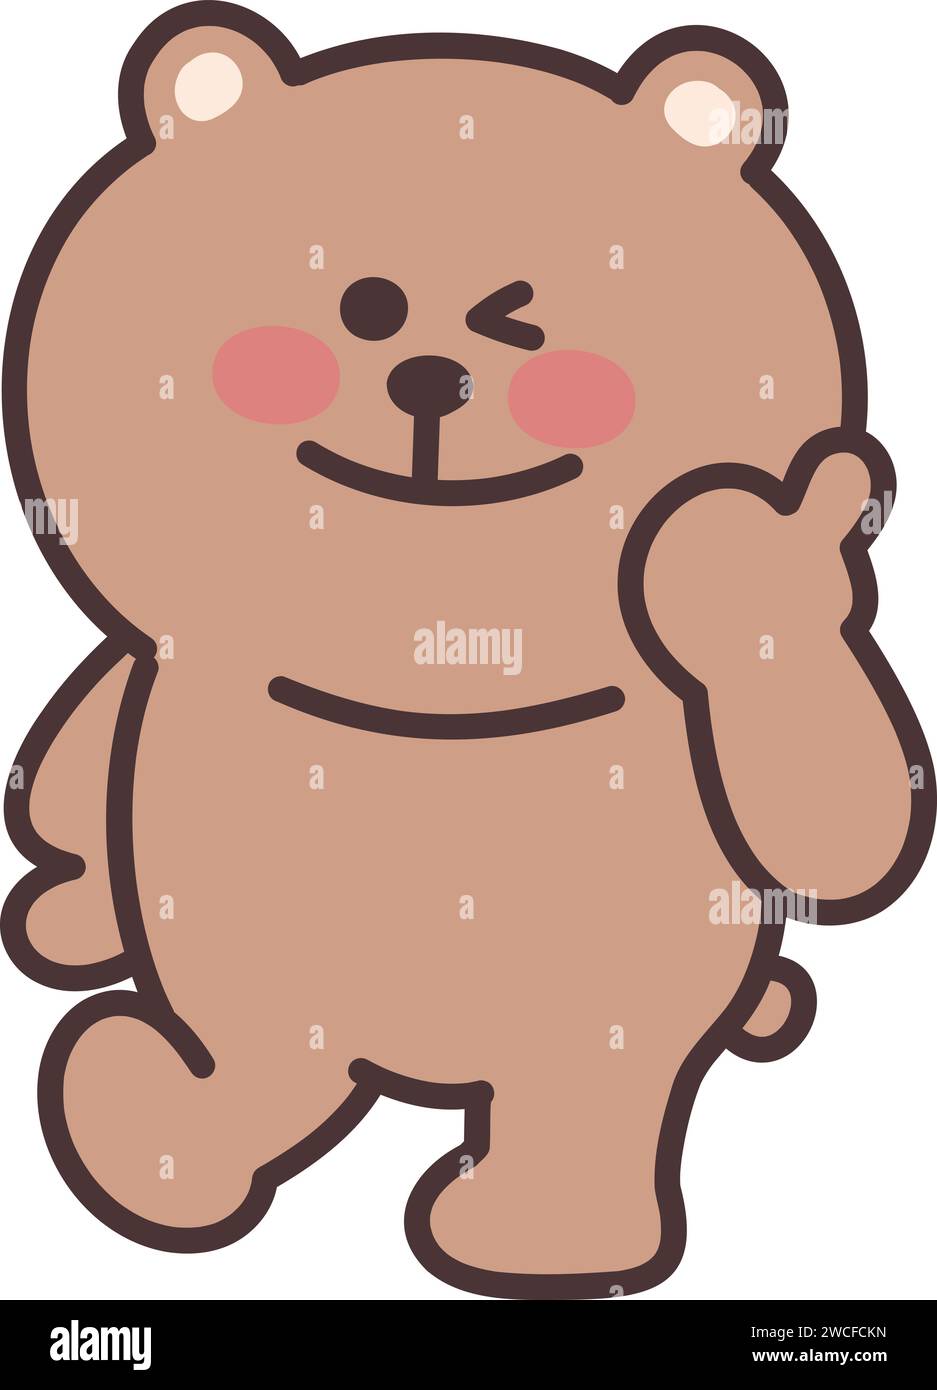 Happy cartoon teddy bear with a thumbs-up sign. Vector illustration isolated on a transparent background. Stock Vector